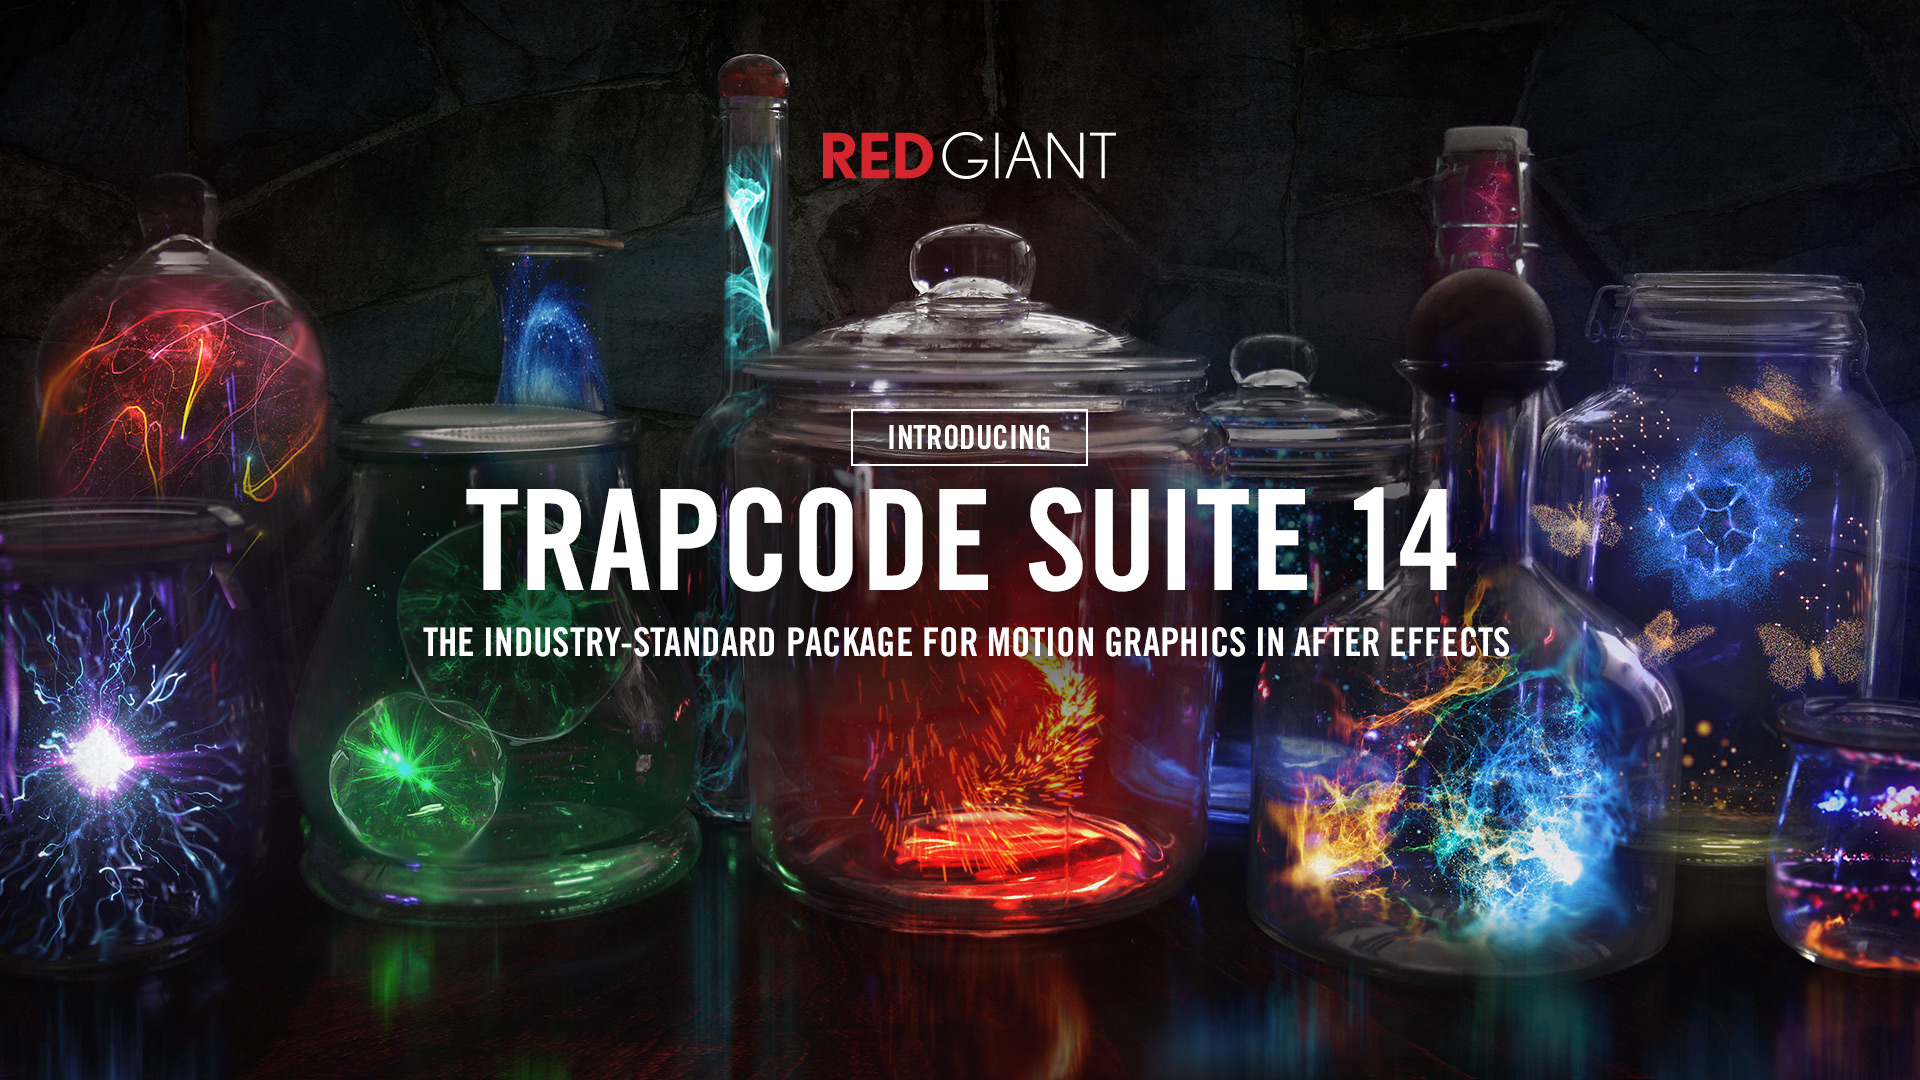 How to, Install Red Giant Trapcode Suite plugin x 64 - YouTube